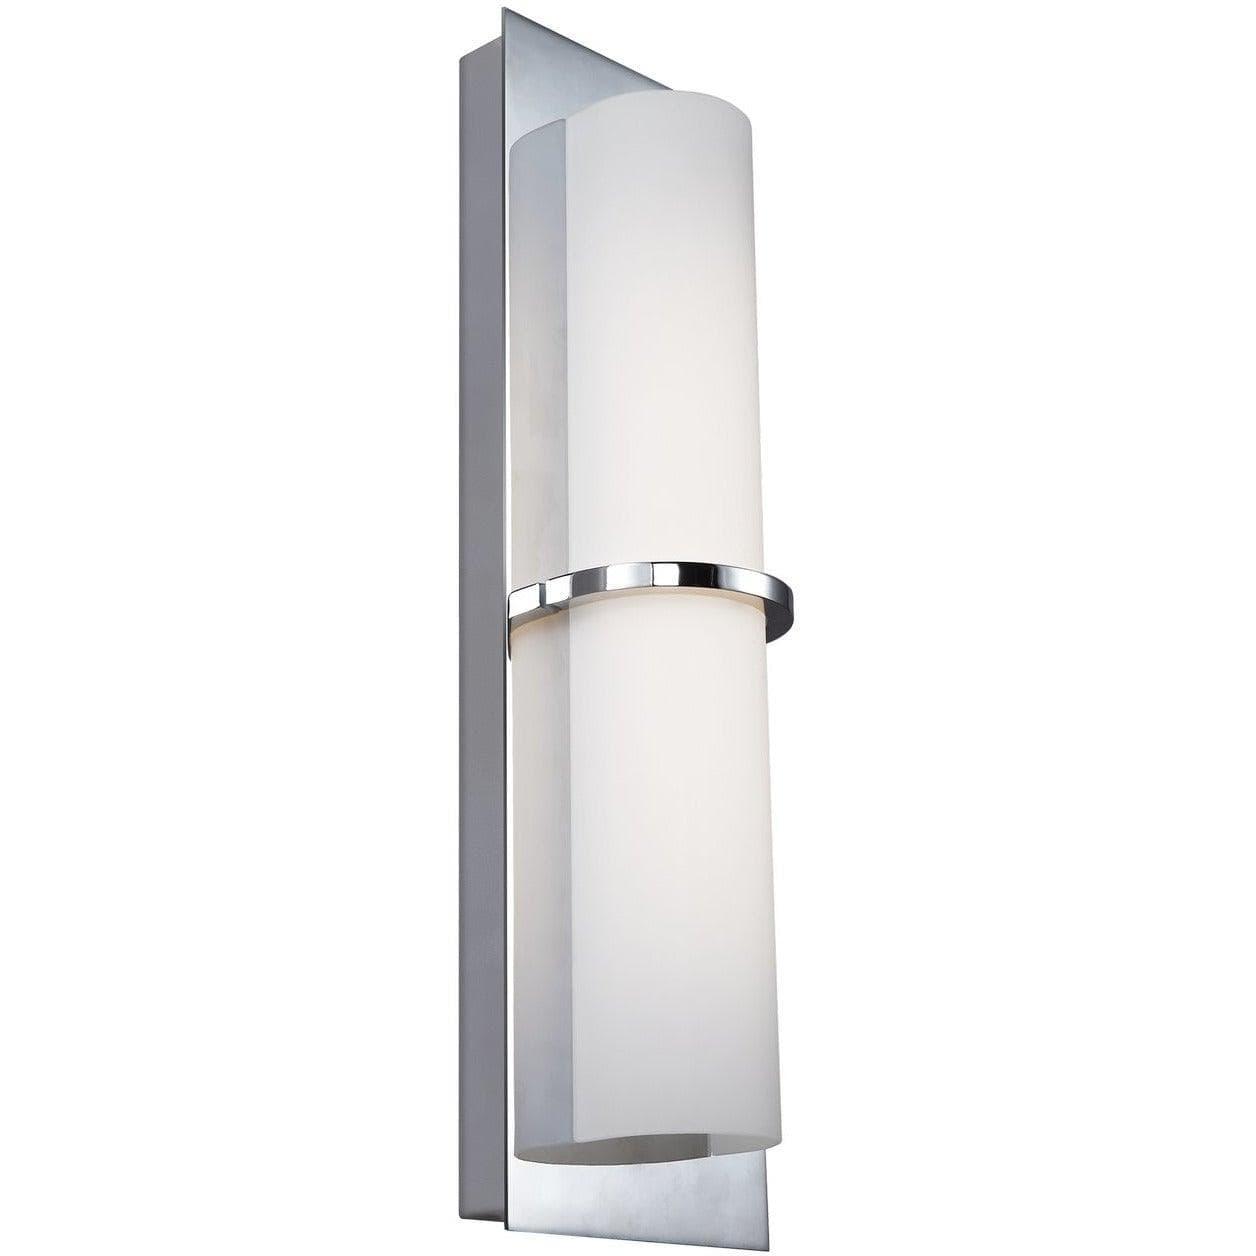 Generation Lighting - Cynder LED Wall Sconce - WB1851CH-L1 | Montreal Lighting & Hardware